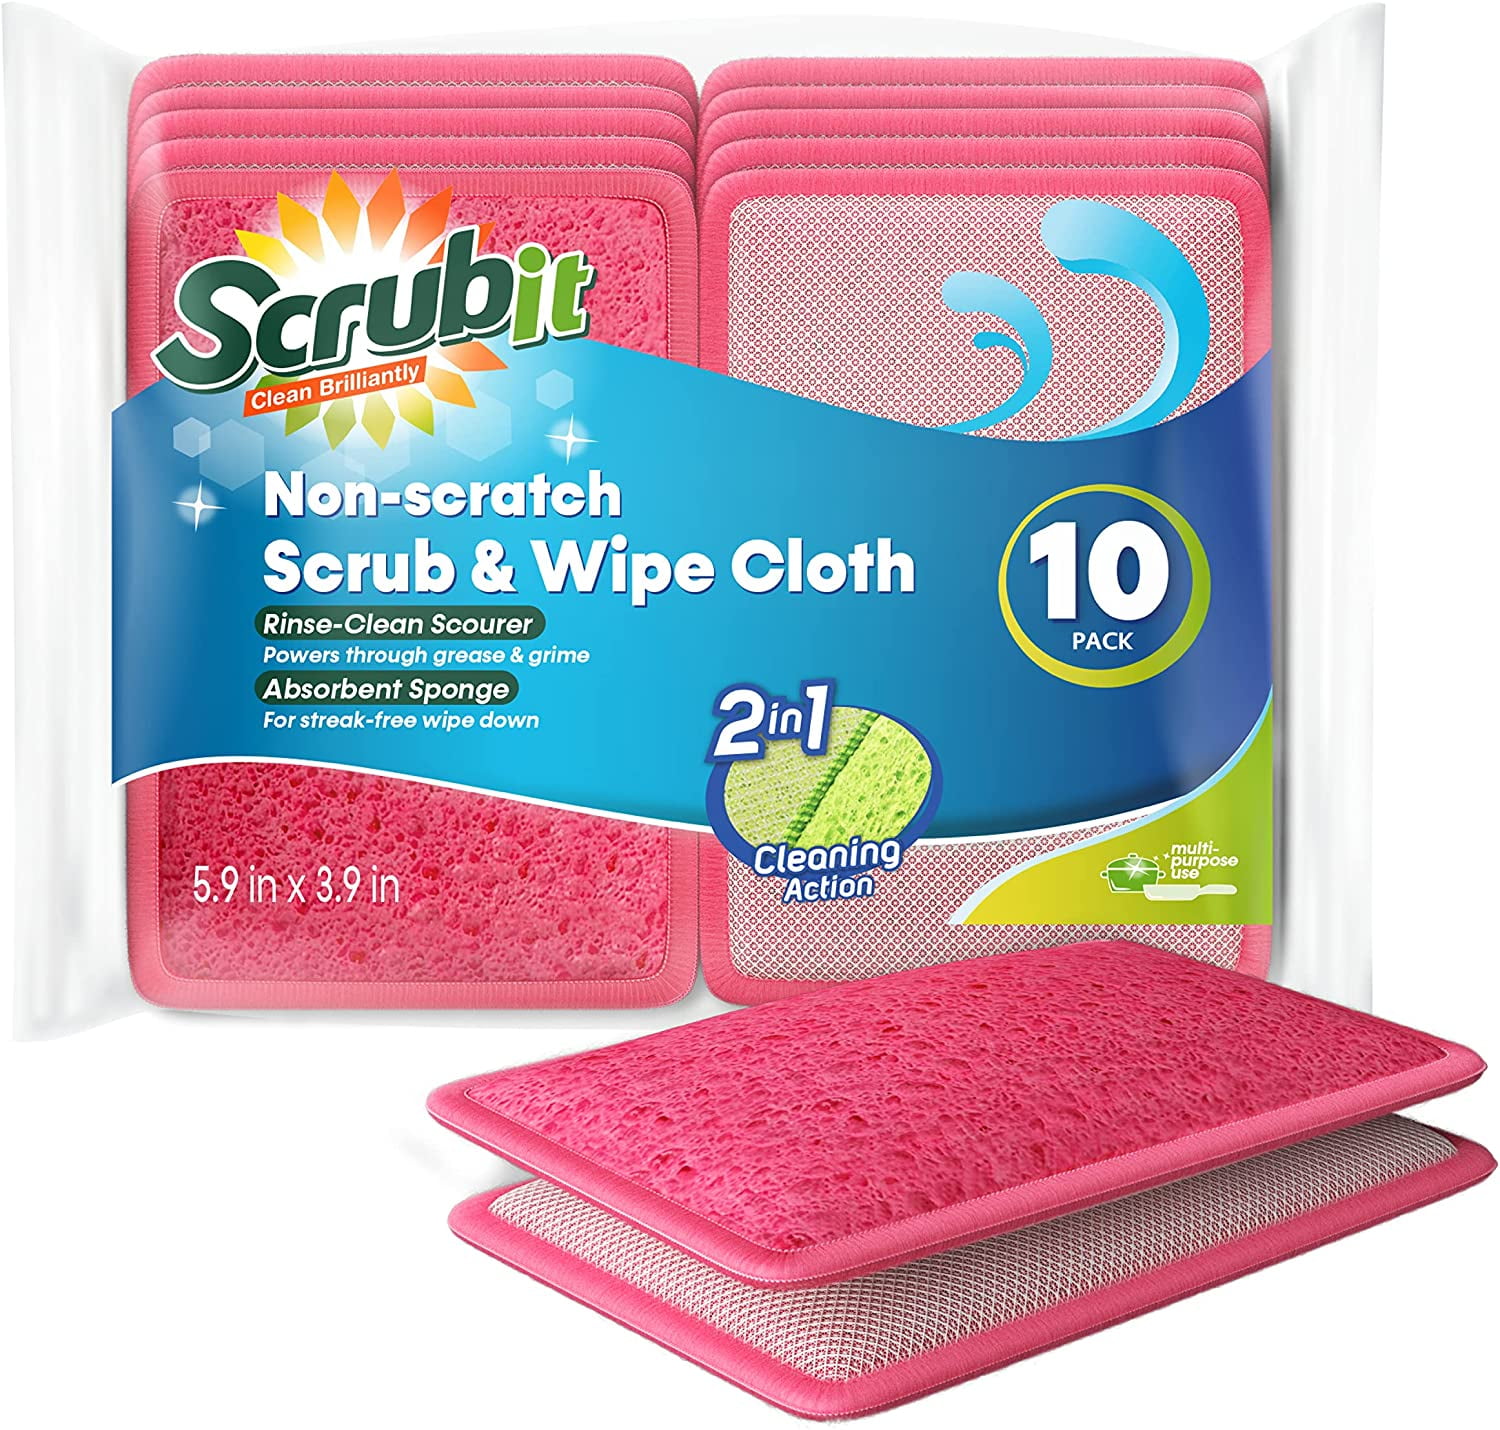  Scrub Daddy Scour Daddy Style Collection, Scourers Sponge, Non  Scratch Scouring Pads, Heavy Duty Scourer Pad for Cleaning Dishes, Superior  to Metal Scourers, Dish Sponges for Washing up, Pack of 2 